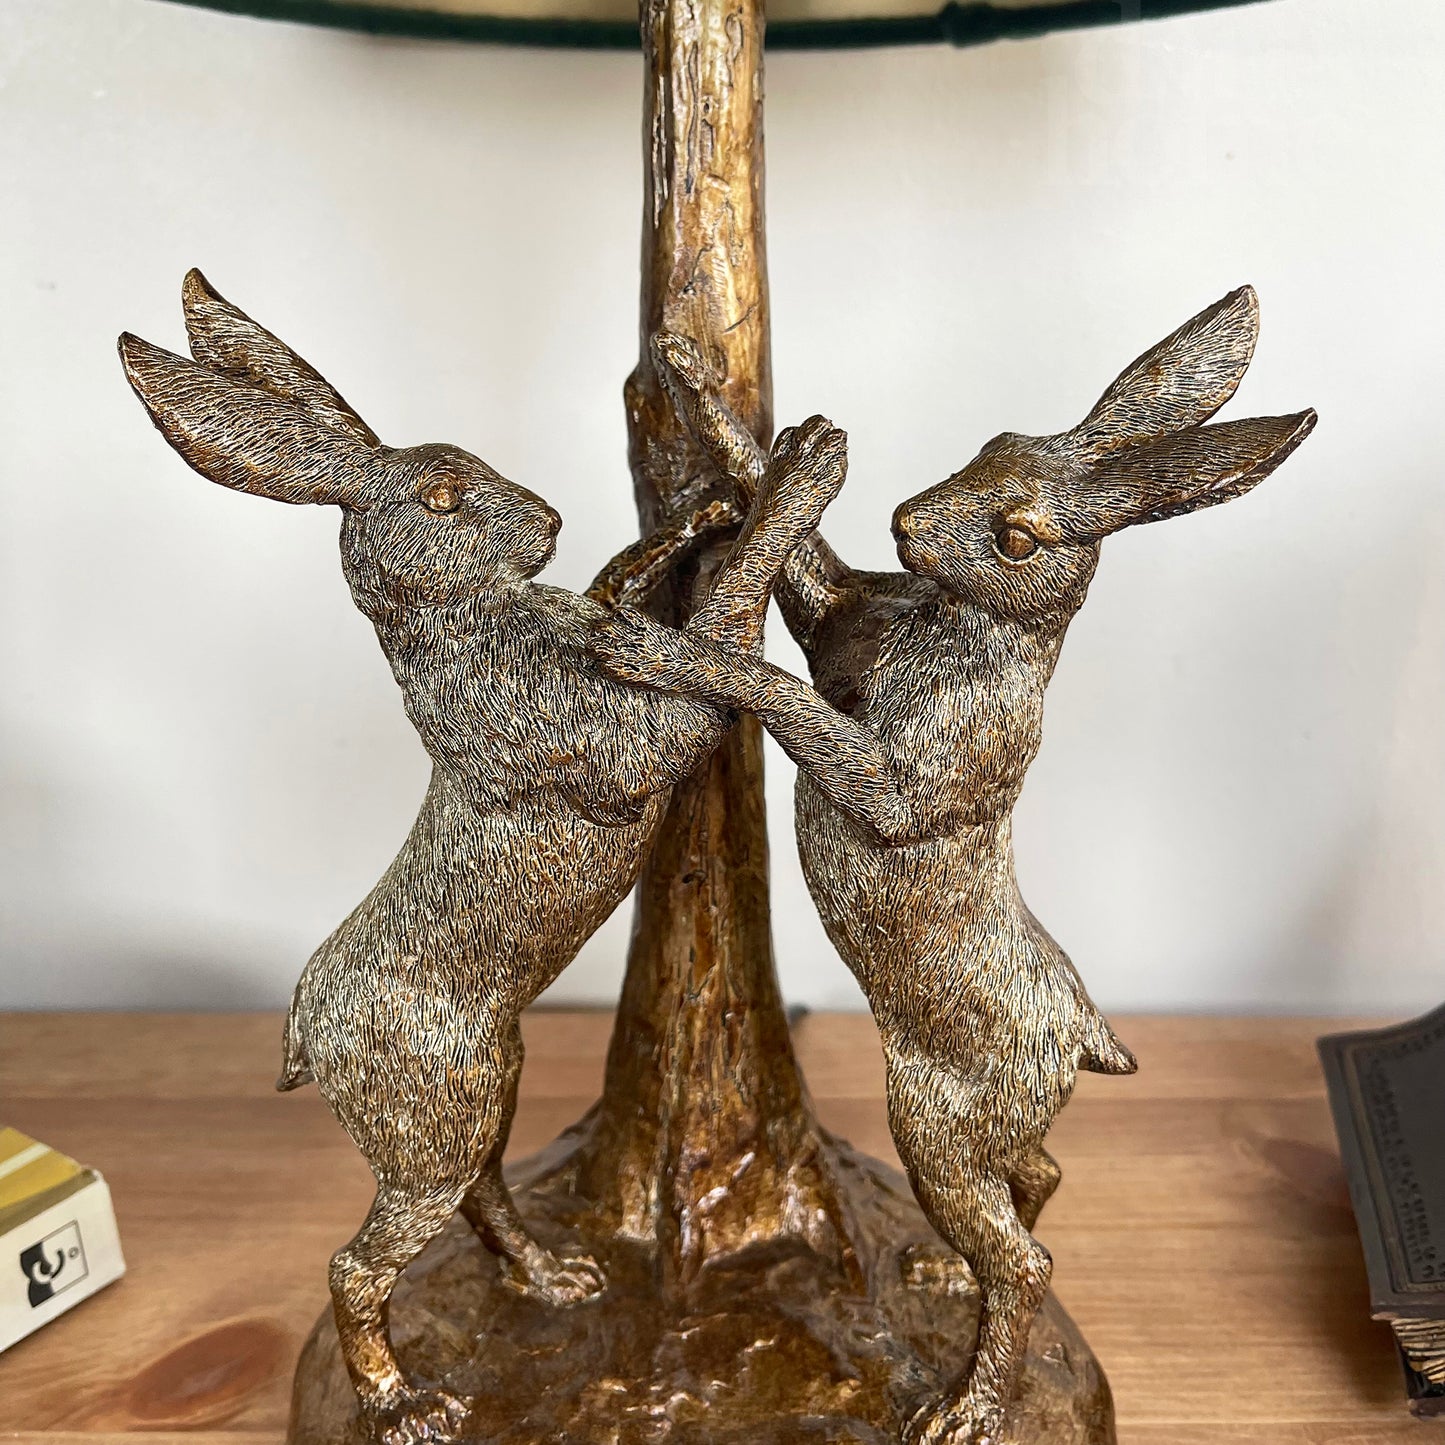 Gold Marching Hares Lamp With Green Velvet Shade